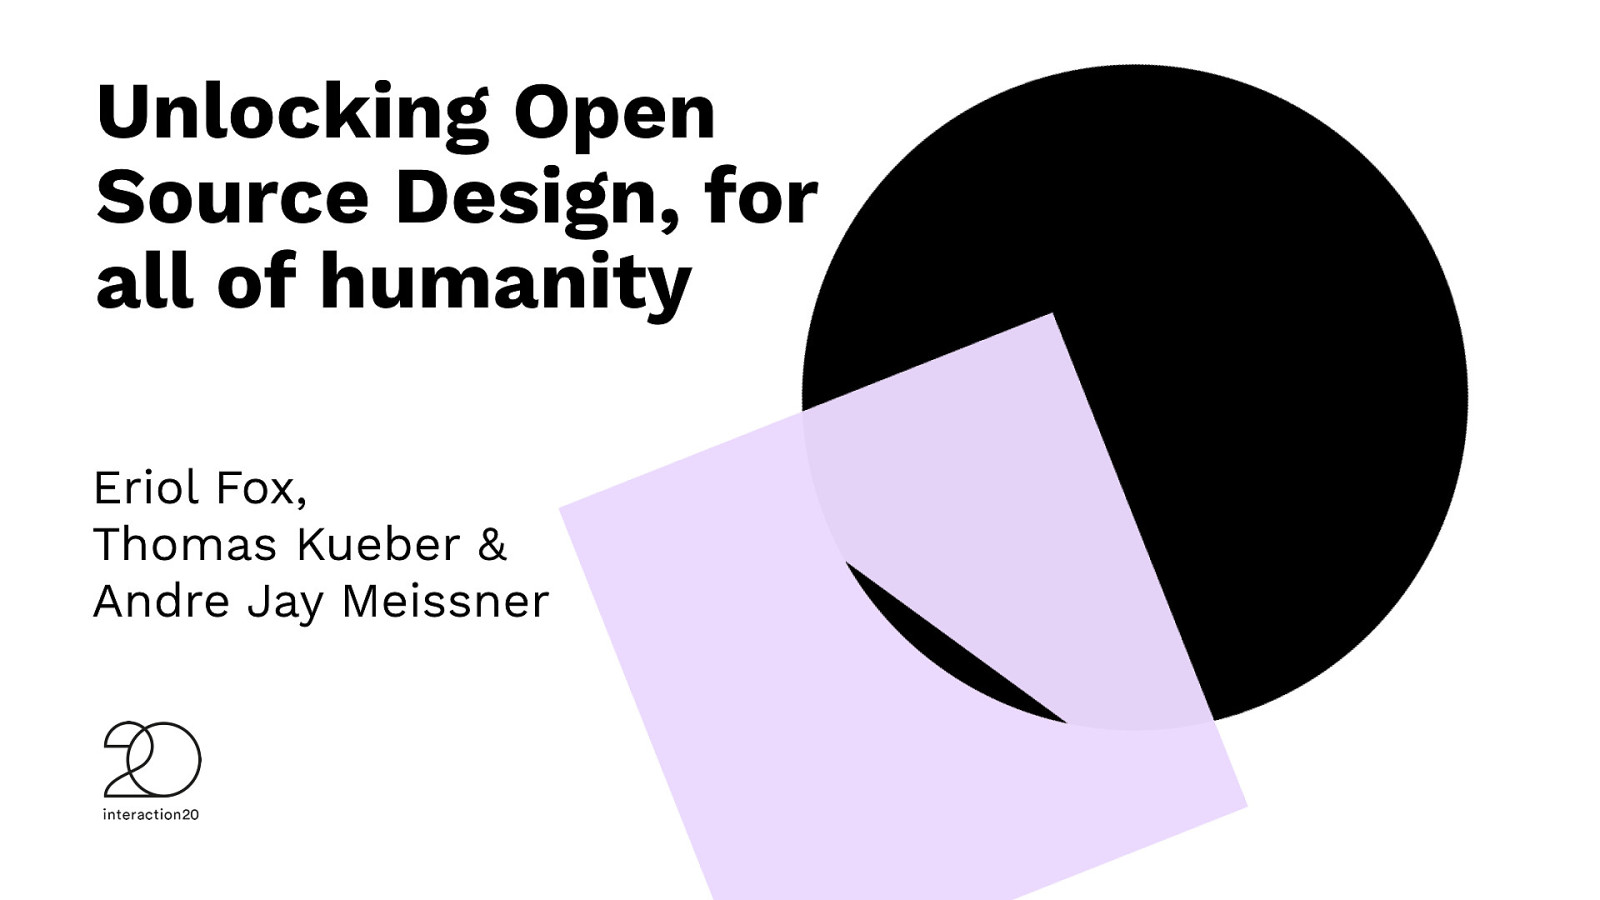 Unlocking Open Source Design, for all of humanity